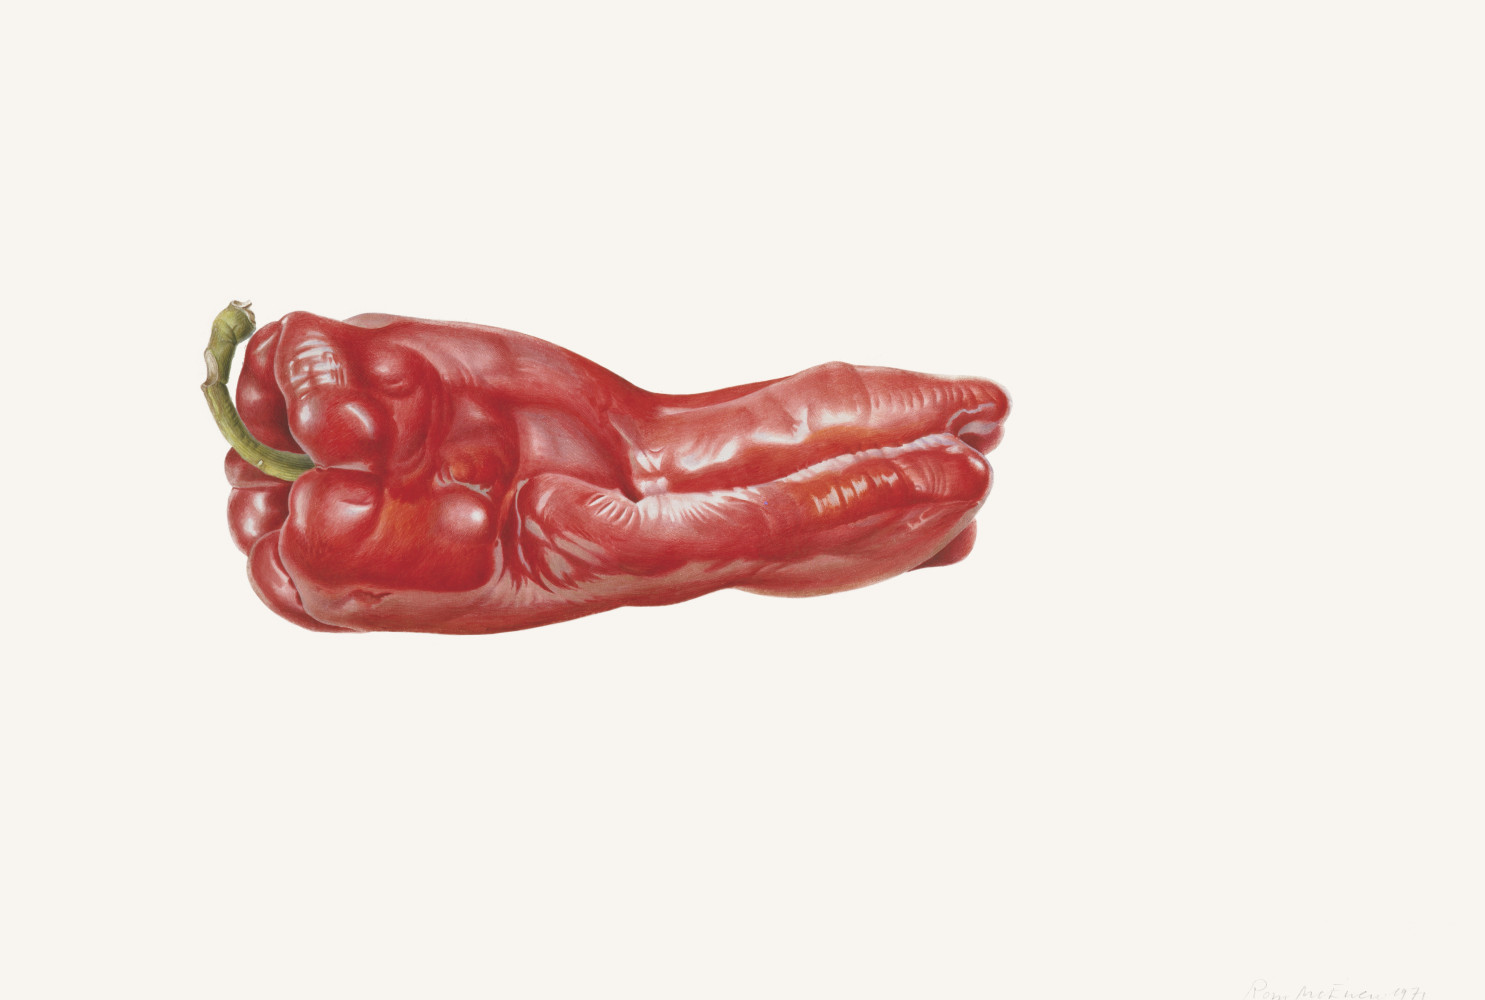 Red Pepper, 1971, by Rory McEwen (Scottish, 1932 – 1982). Watercolor on vellum, 11.38 × 15.5 in. On loan courtesy of Lord and Lady Hesketh. ©2023 Estate of Rory McEwen